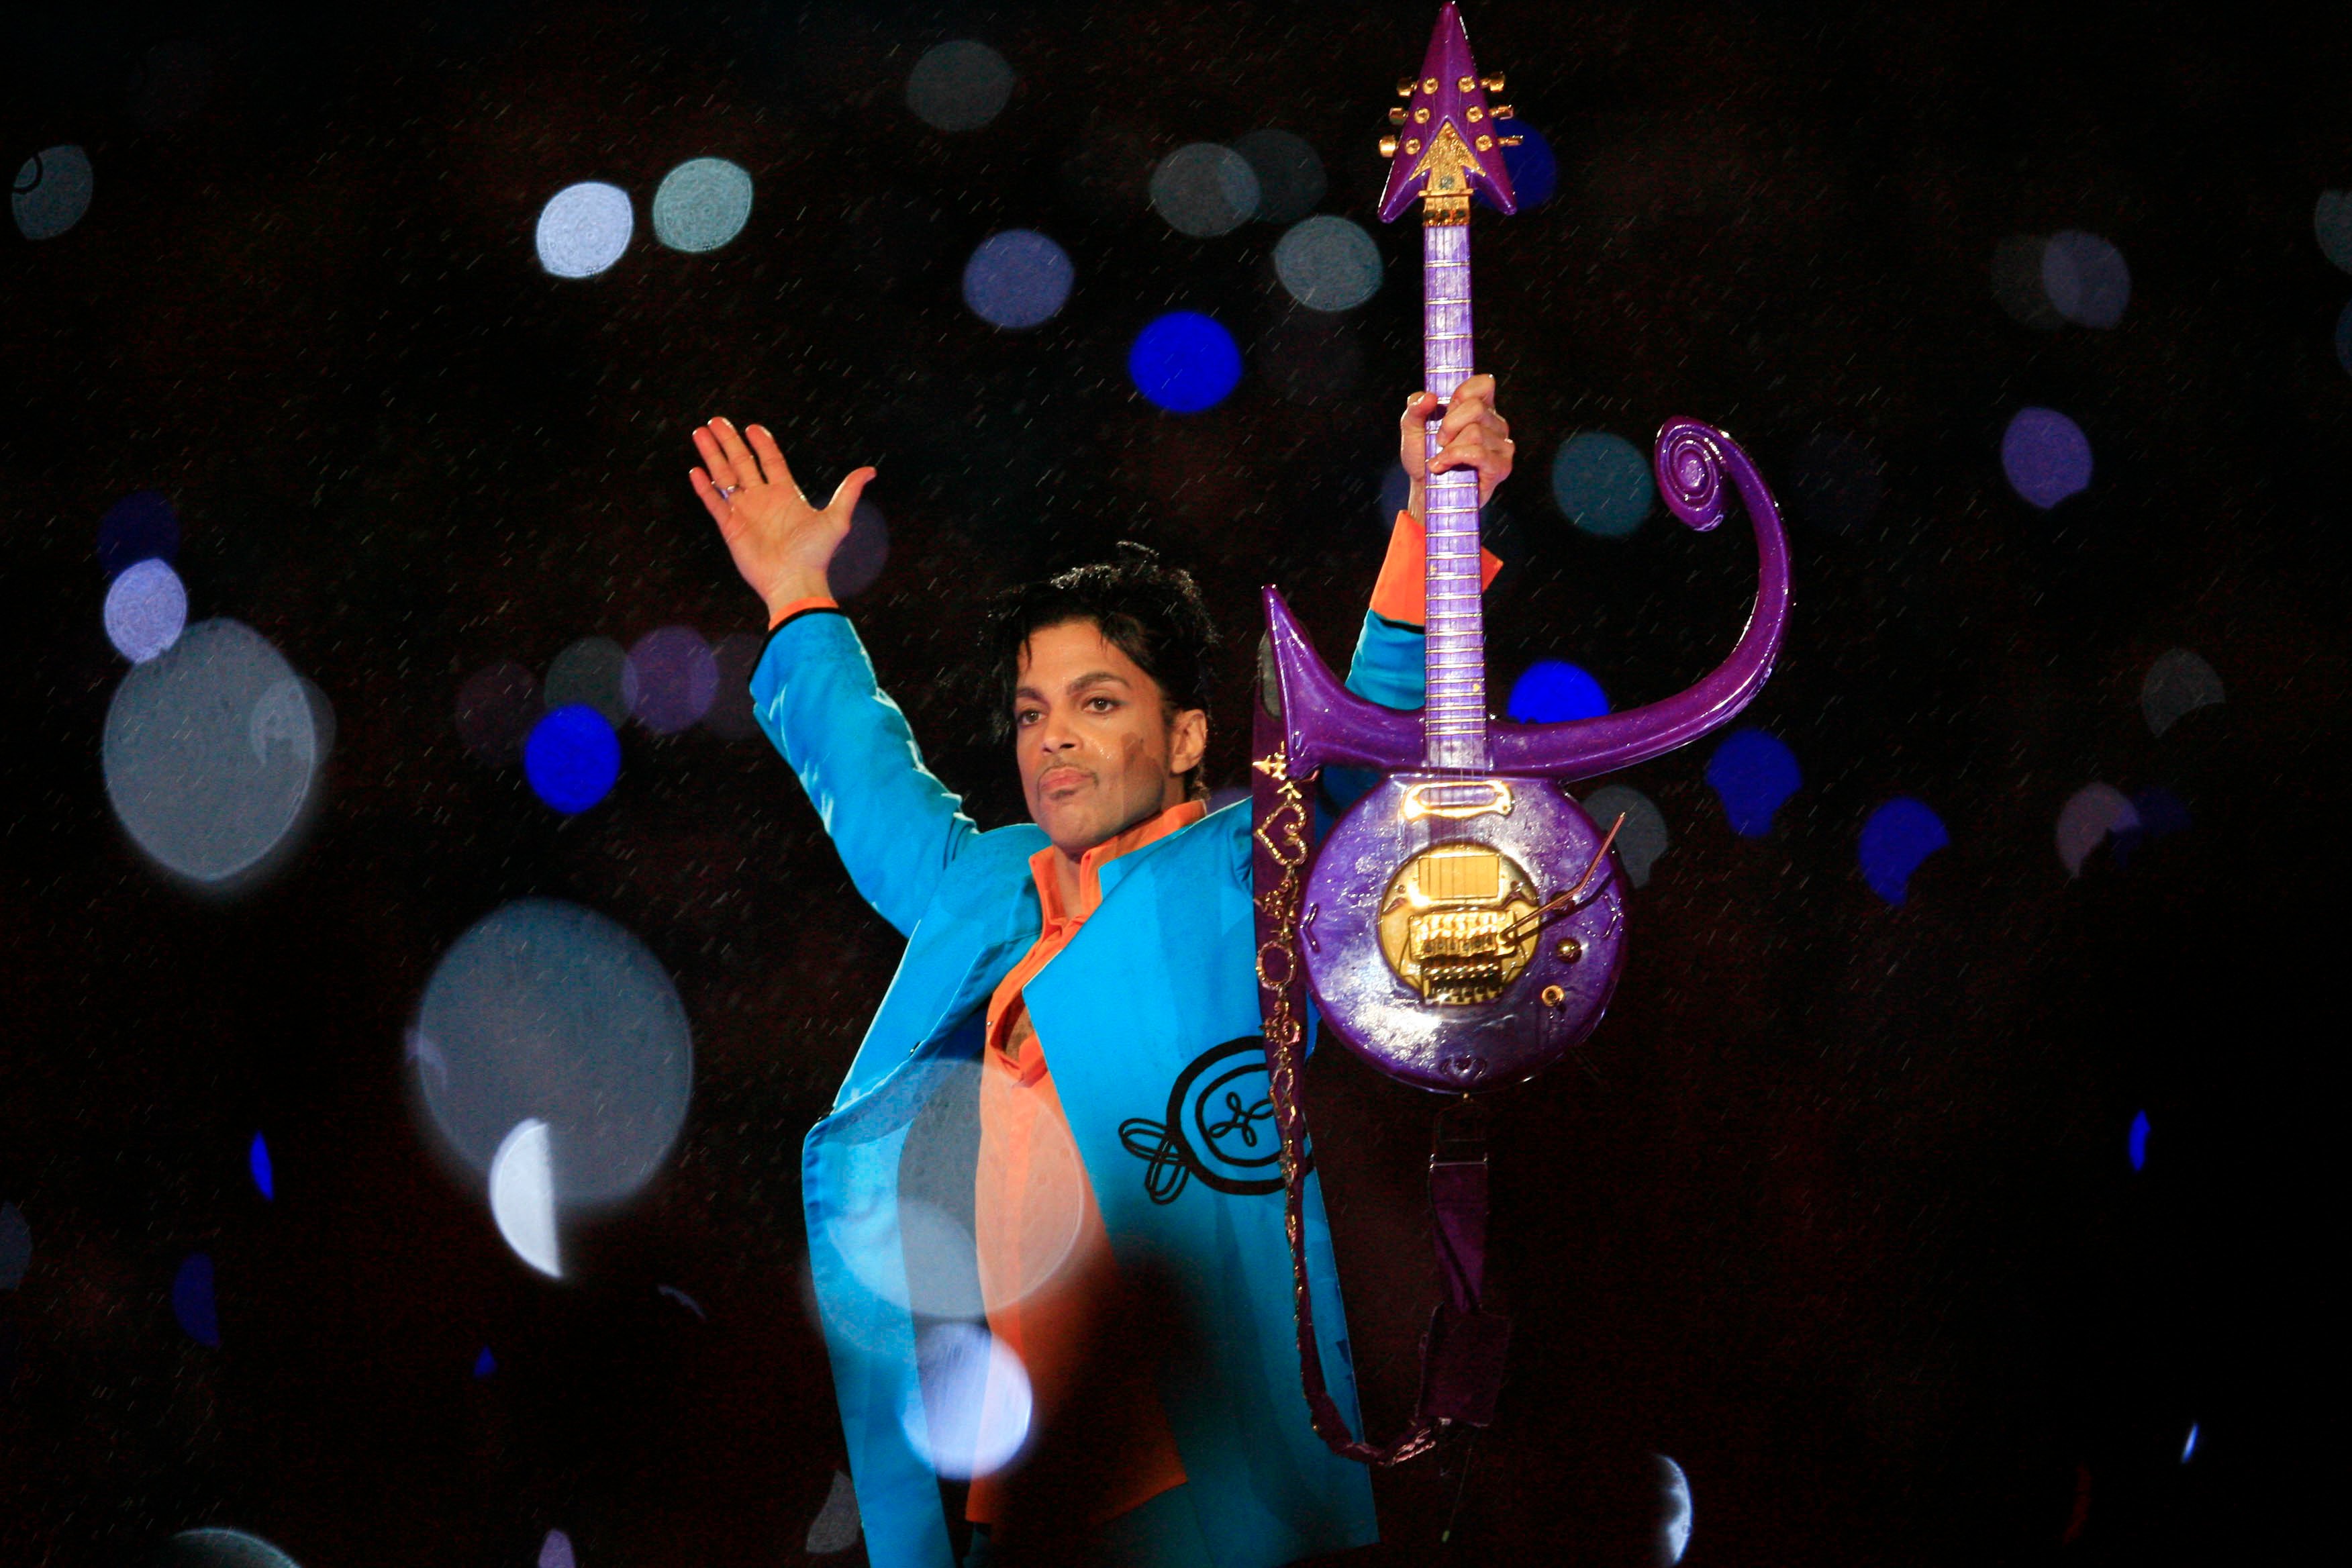 Prince performing during the 'Pepsi Halftime Show' at Super Bowl XLI